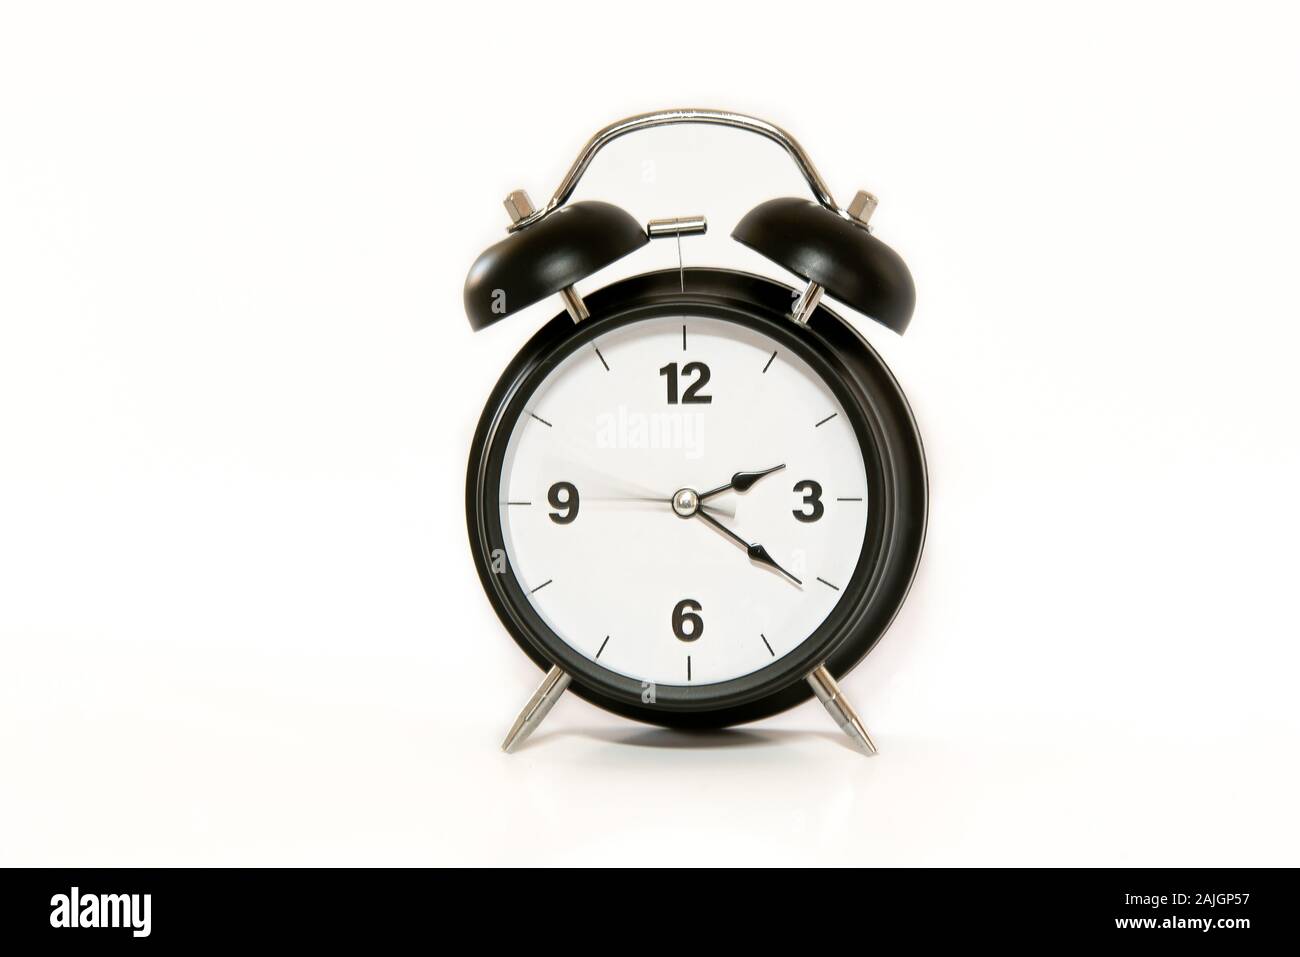 Vintage alarm clock with simple and minimalist design, isolated on white background. Second arm in movement, feeling of passing time, ticking. Stock Photo